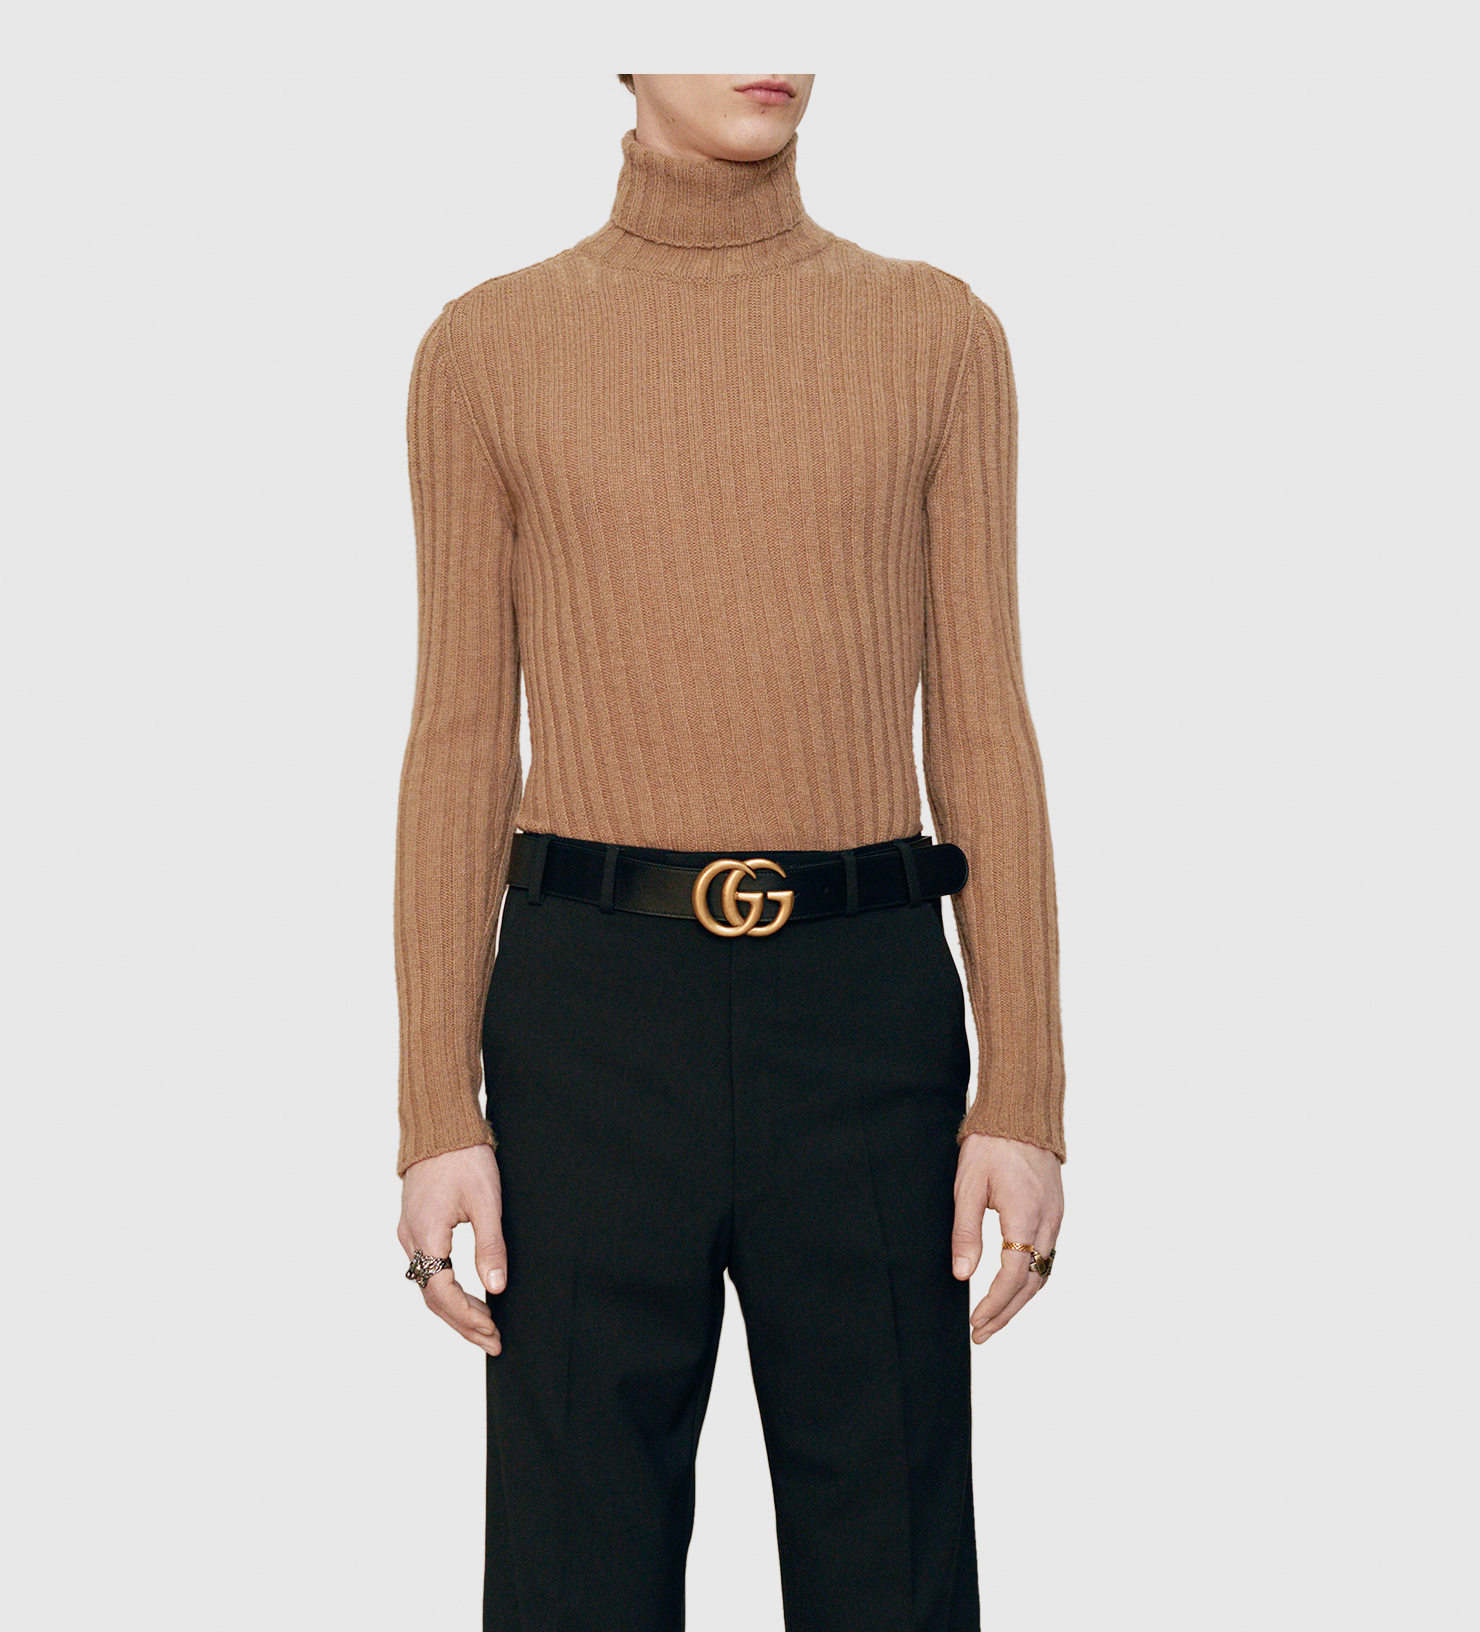 Gucci Camel Turtleneck Sweater in 